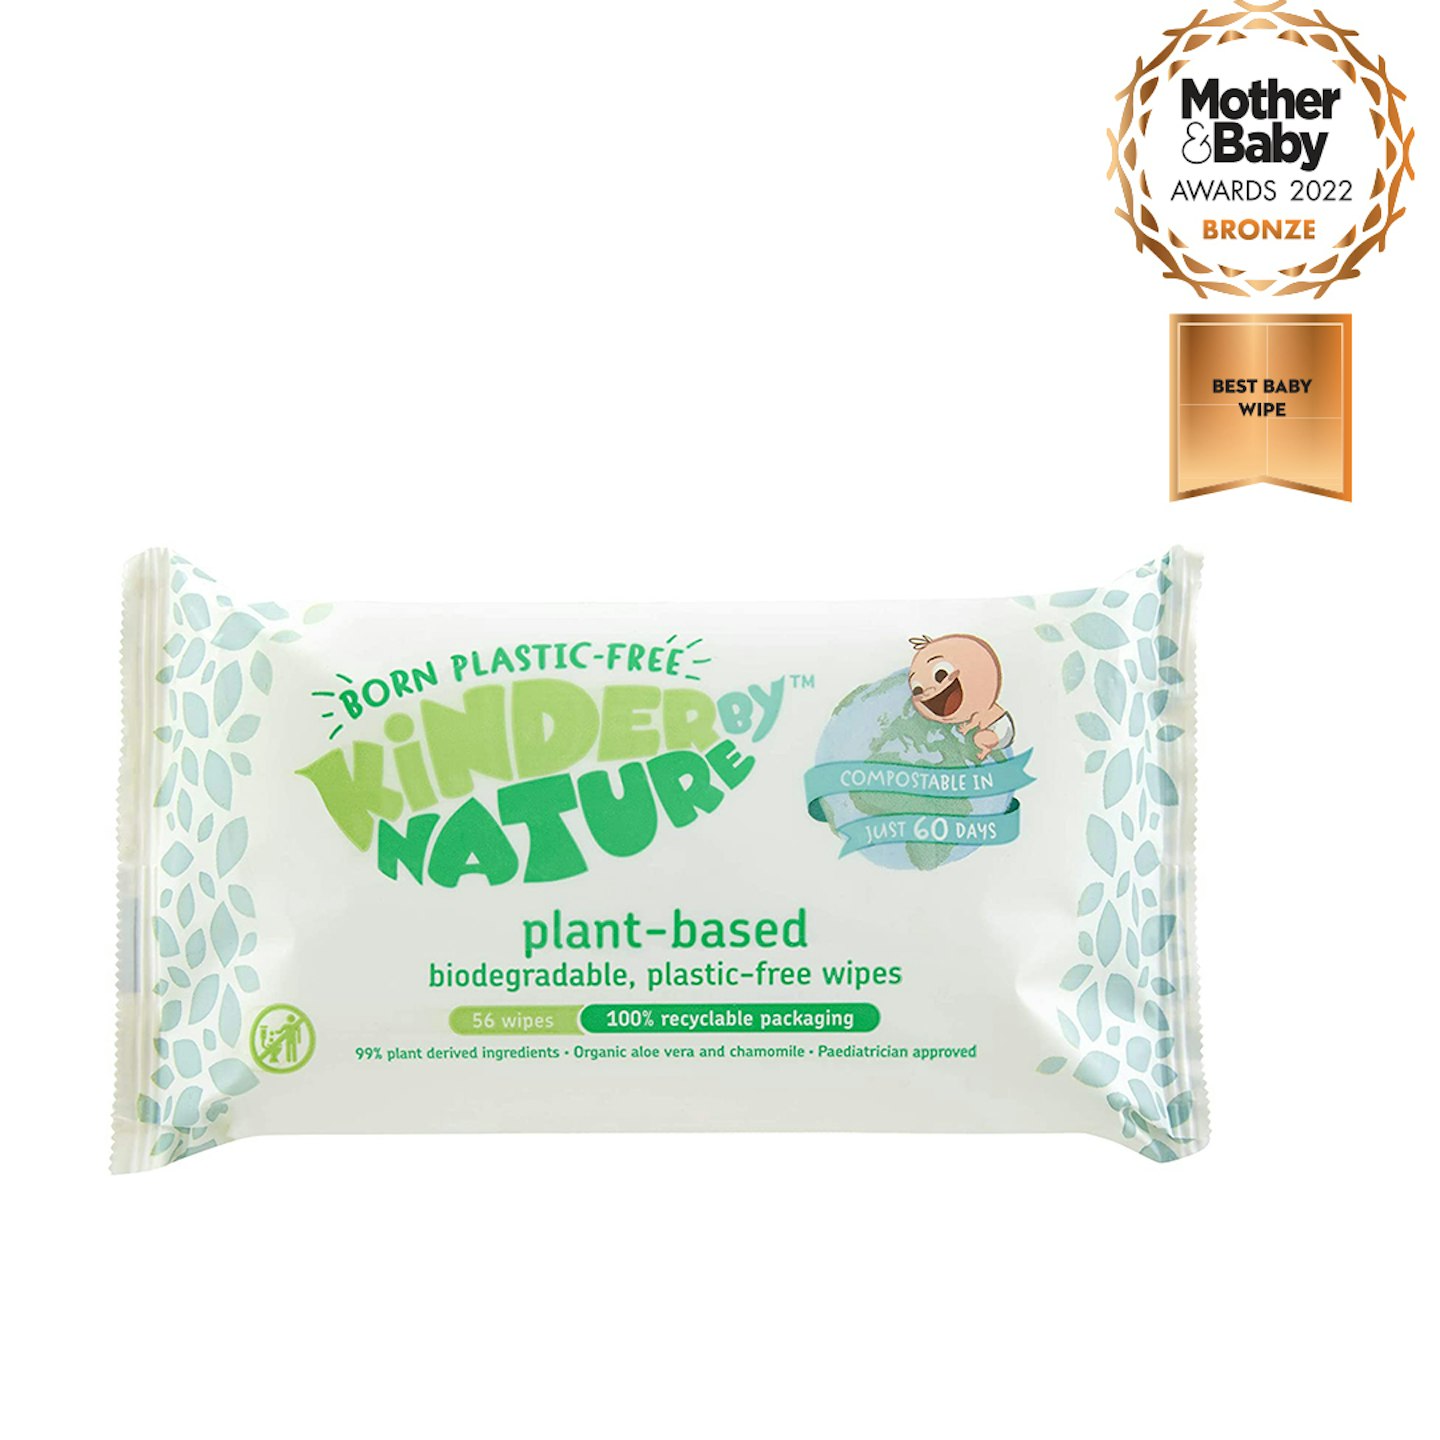 Kinder by NATURE Plant-based baby wipes from Jackson Reece